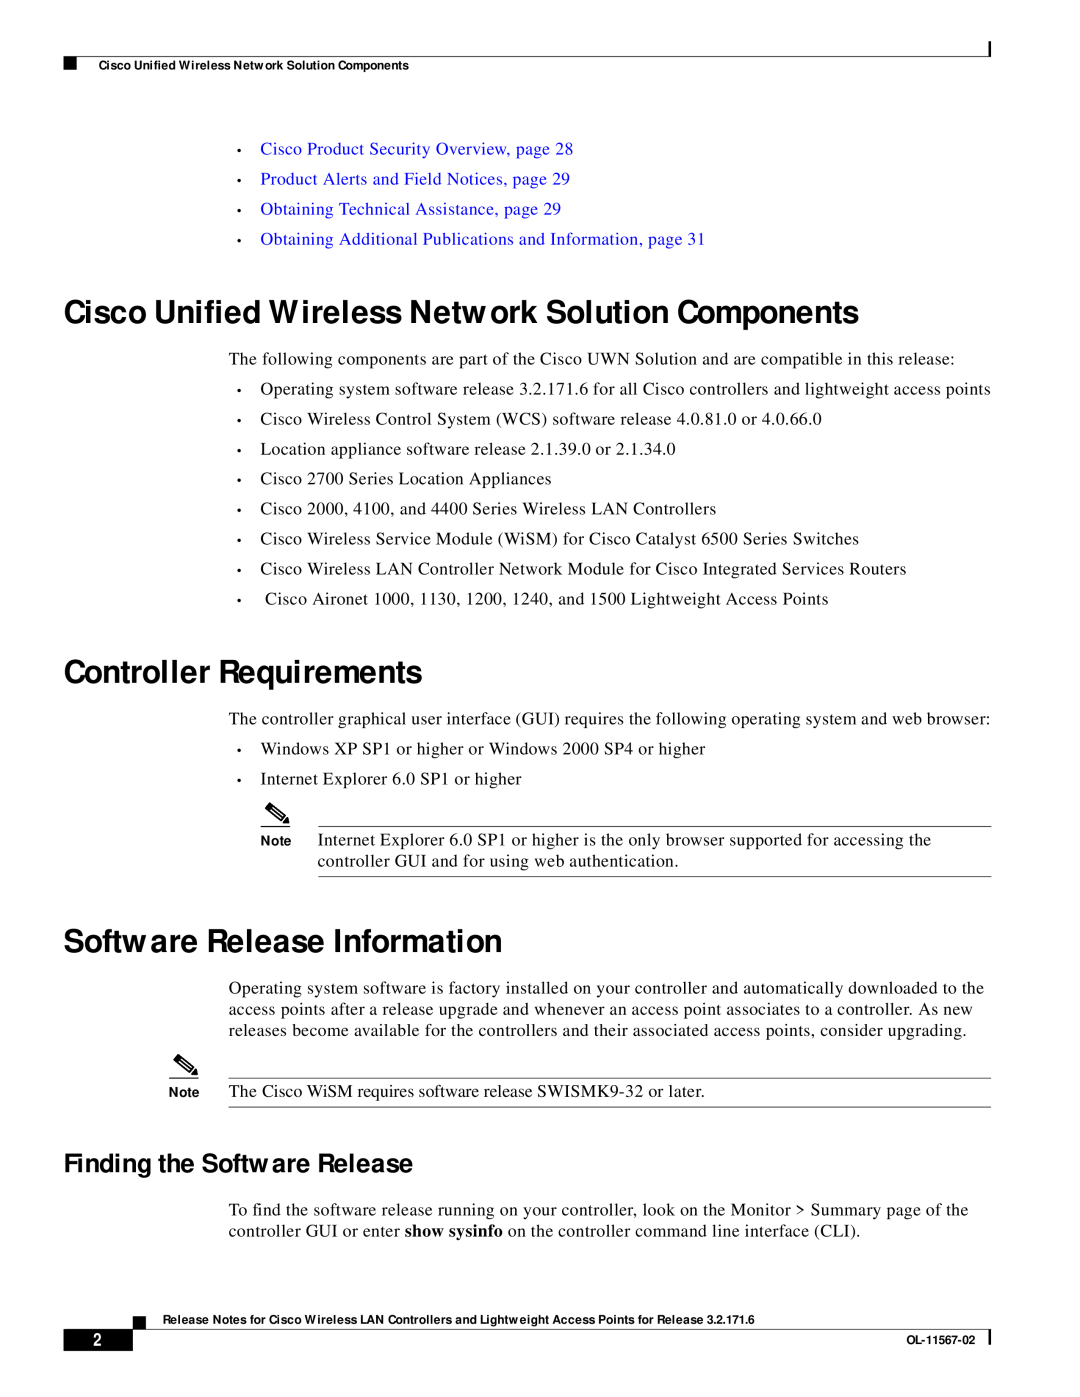 Cisco Systems OL-11567-02 manual Cisco Unified Wireless Network Solution Components, Controller Requirements 